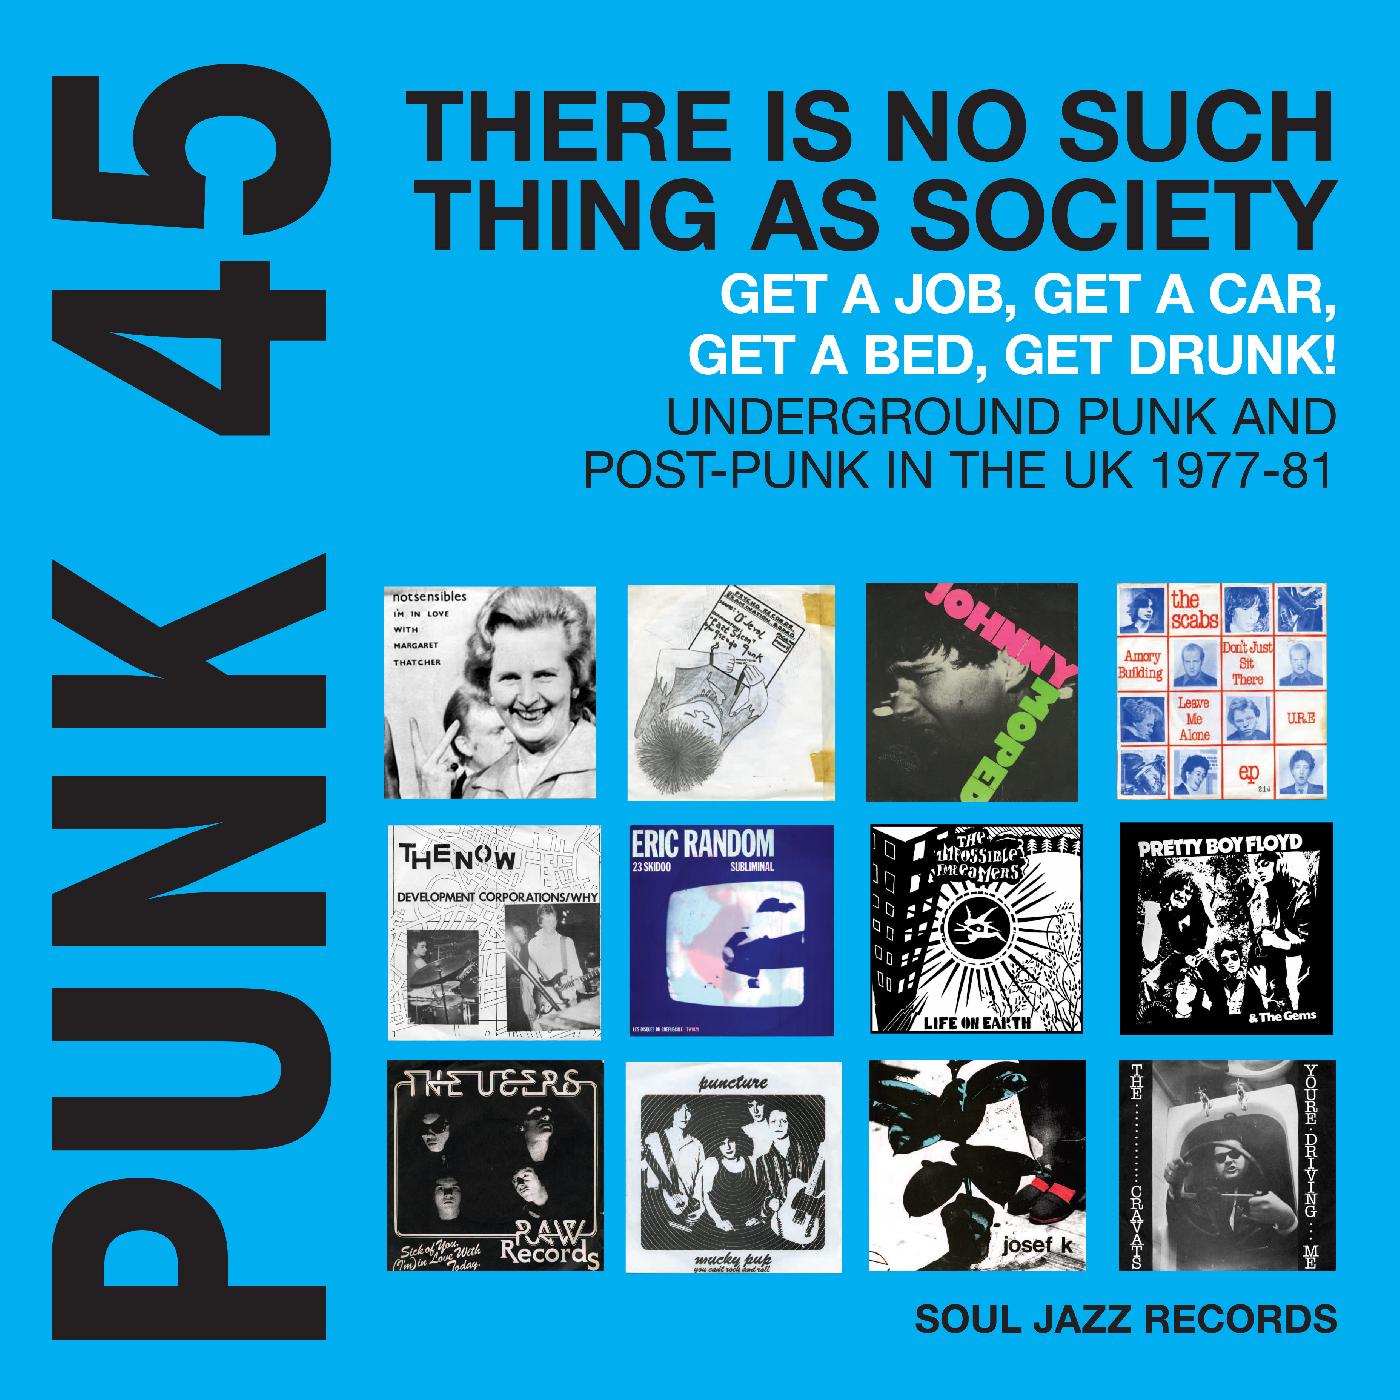 Soul Jazz Records presents | PUNK 45: There Is No Such Thing As Society ‚Äì Get A Job, Get A Car, Get A Bed, Get Drunk! Underground Punk And Post-Punk in the UK 1977-81 (CYAN BLUE VINYL) | Vinyl